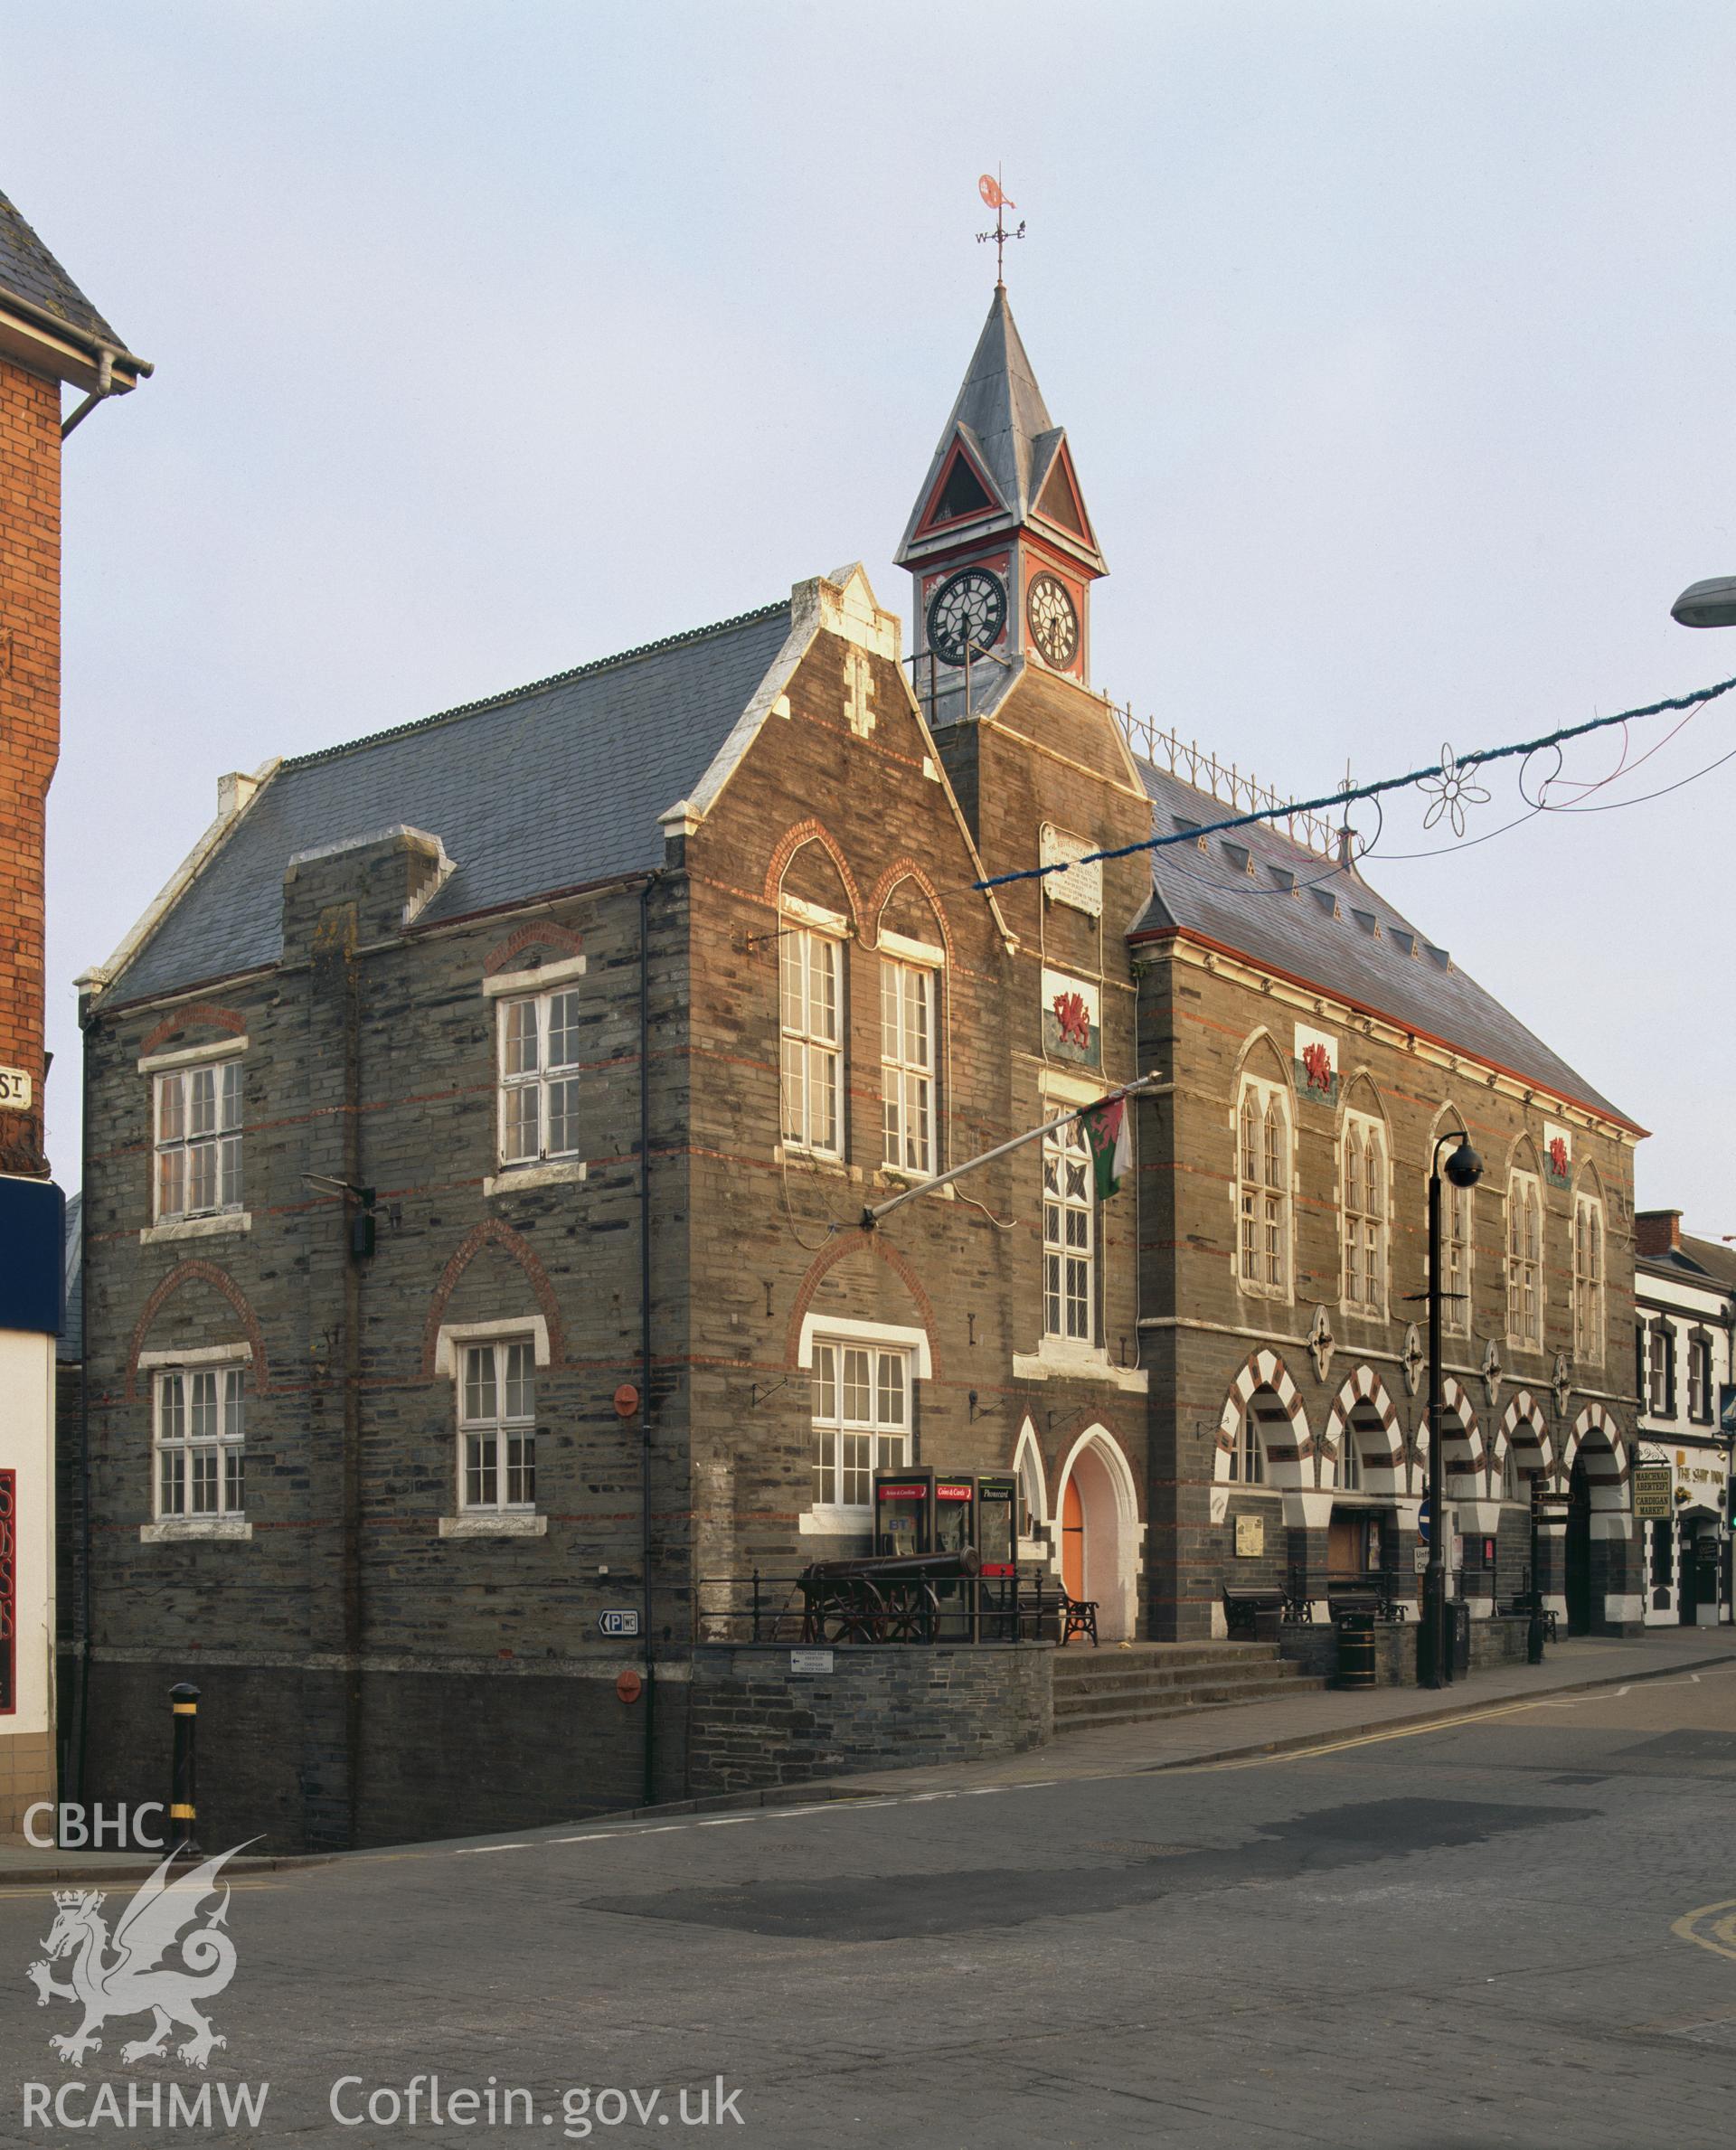 Colour transparency showing the Guildhall at Cardigan, produced by Iain Wright, June 2004